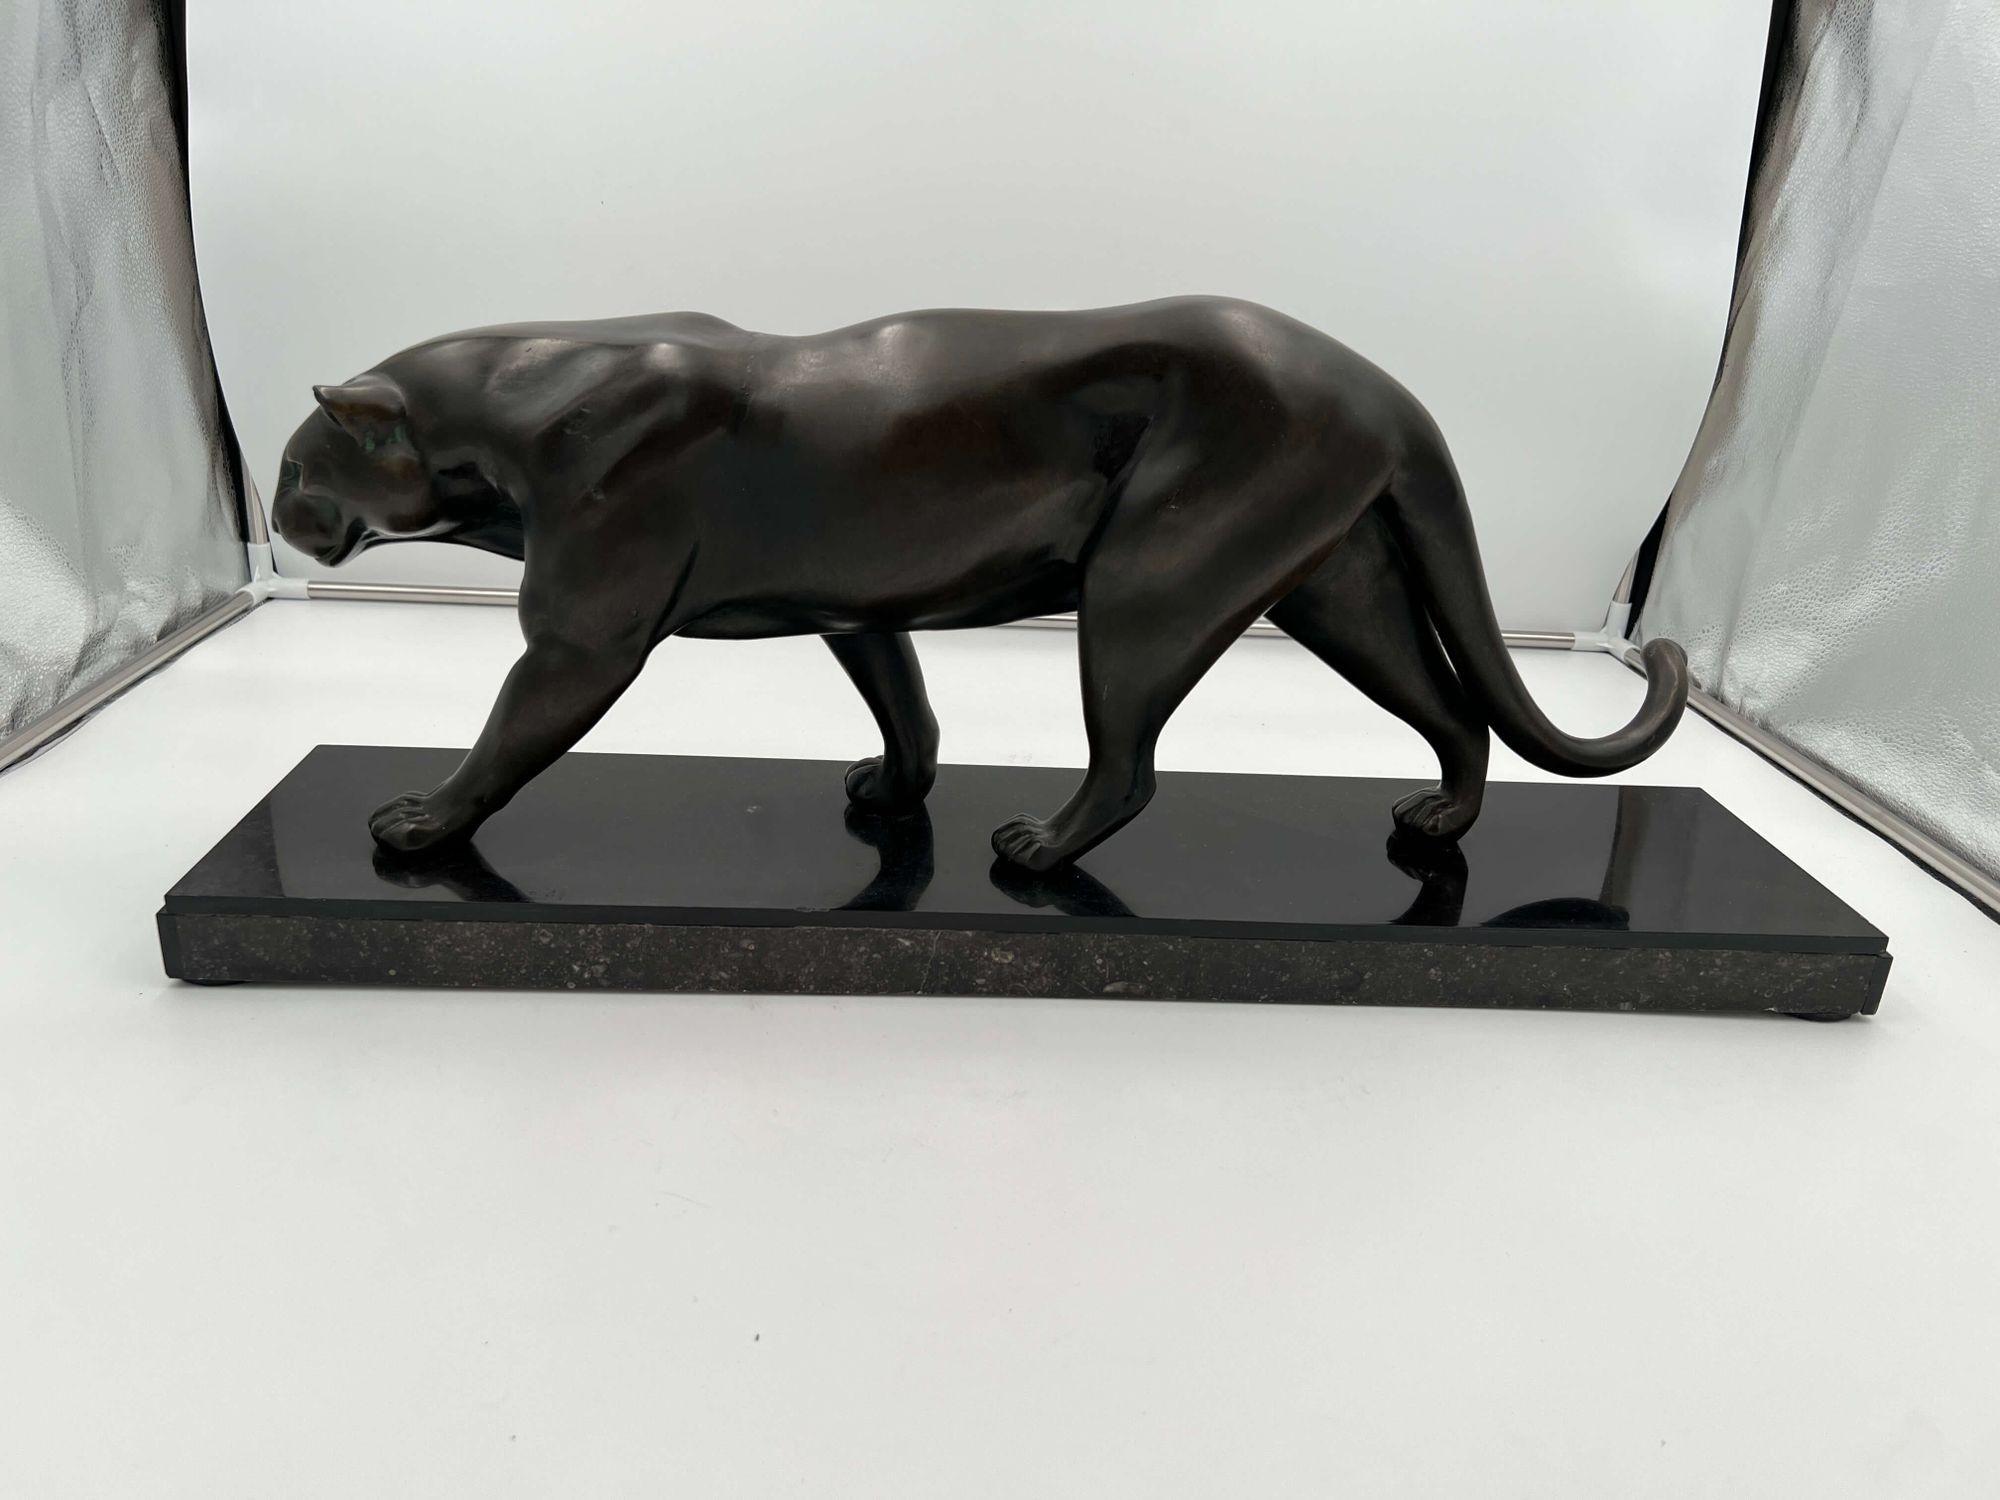 Wonderful large Art Deco Panther Sculpture by Rules from France circa 1930.
Bronze, dark brown patinated. Standing on black marble base. Design by Rulas (unsigned).
Dimensions: H 28 cm x B 72 cm x T 17 cm (incl. marble plinth)